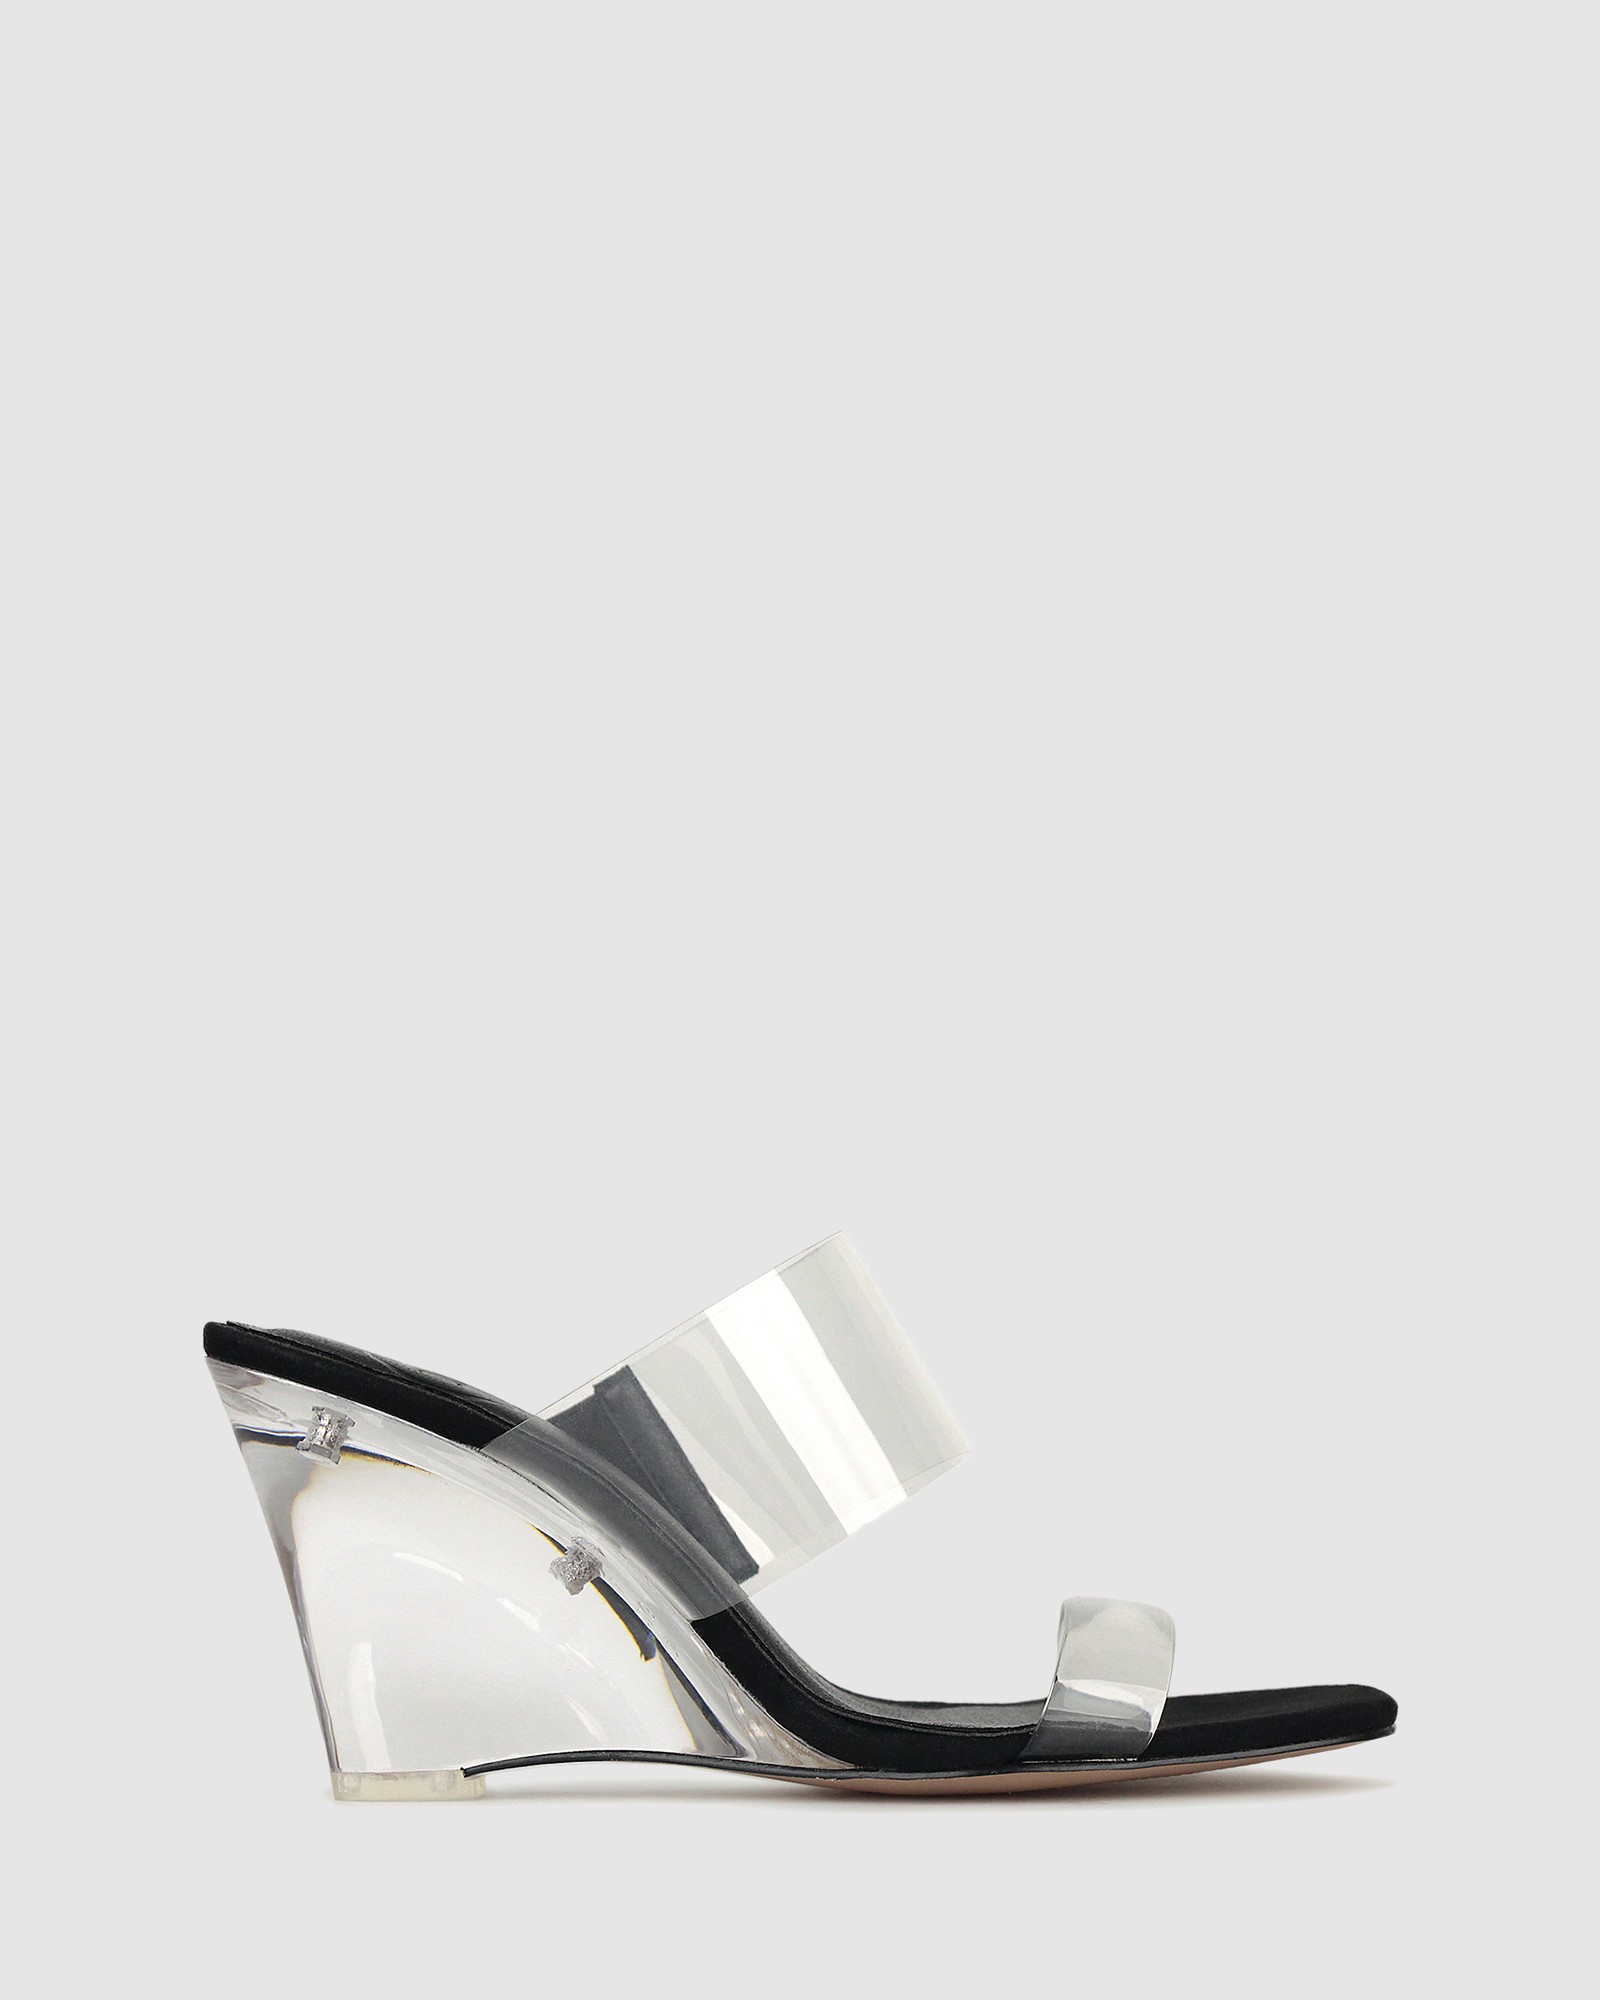 Keely Vynalite Wedge Mules Black/Clear by Zu | ShoeSales